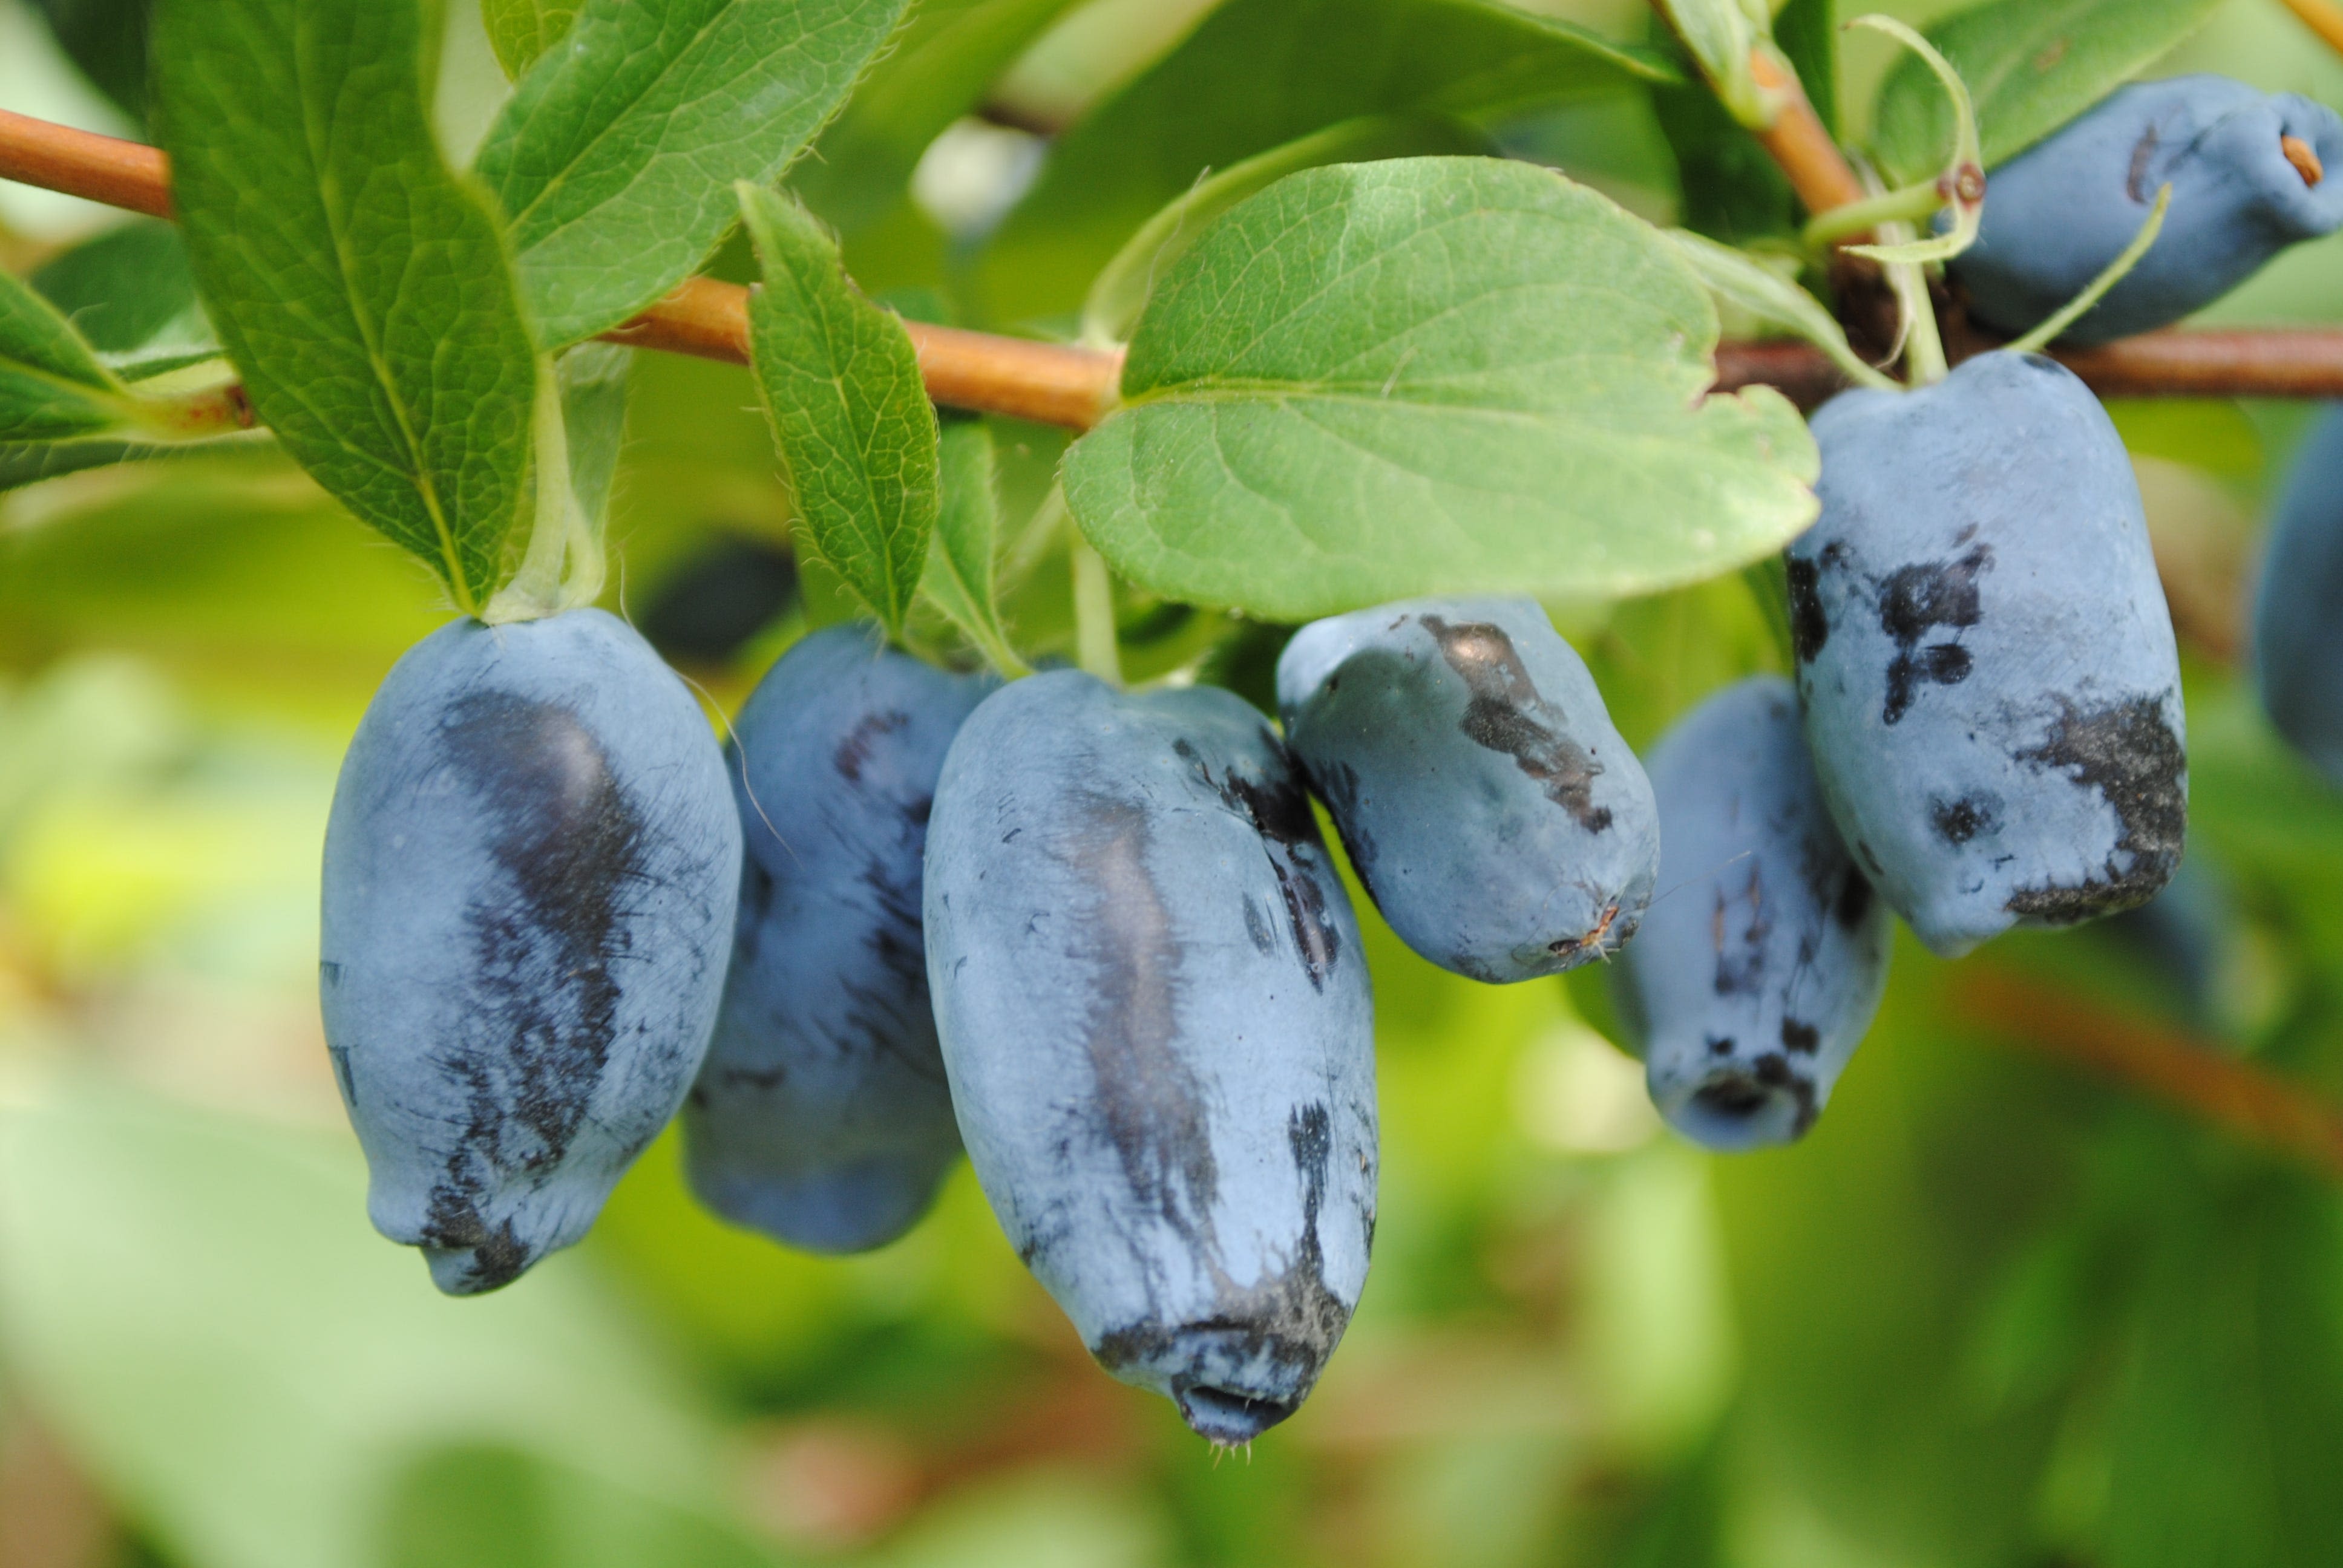 Fruit lovers, meet the Honeyberry, the best new fruit of which you’ve never heard